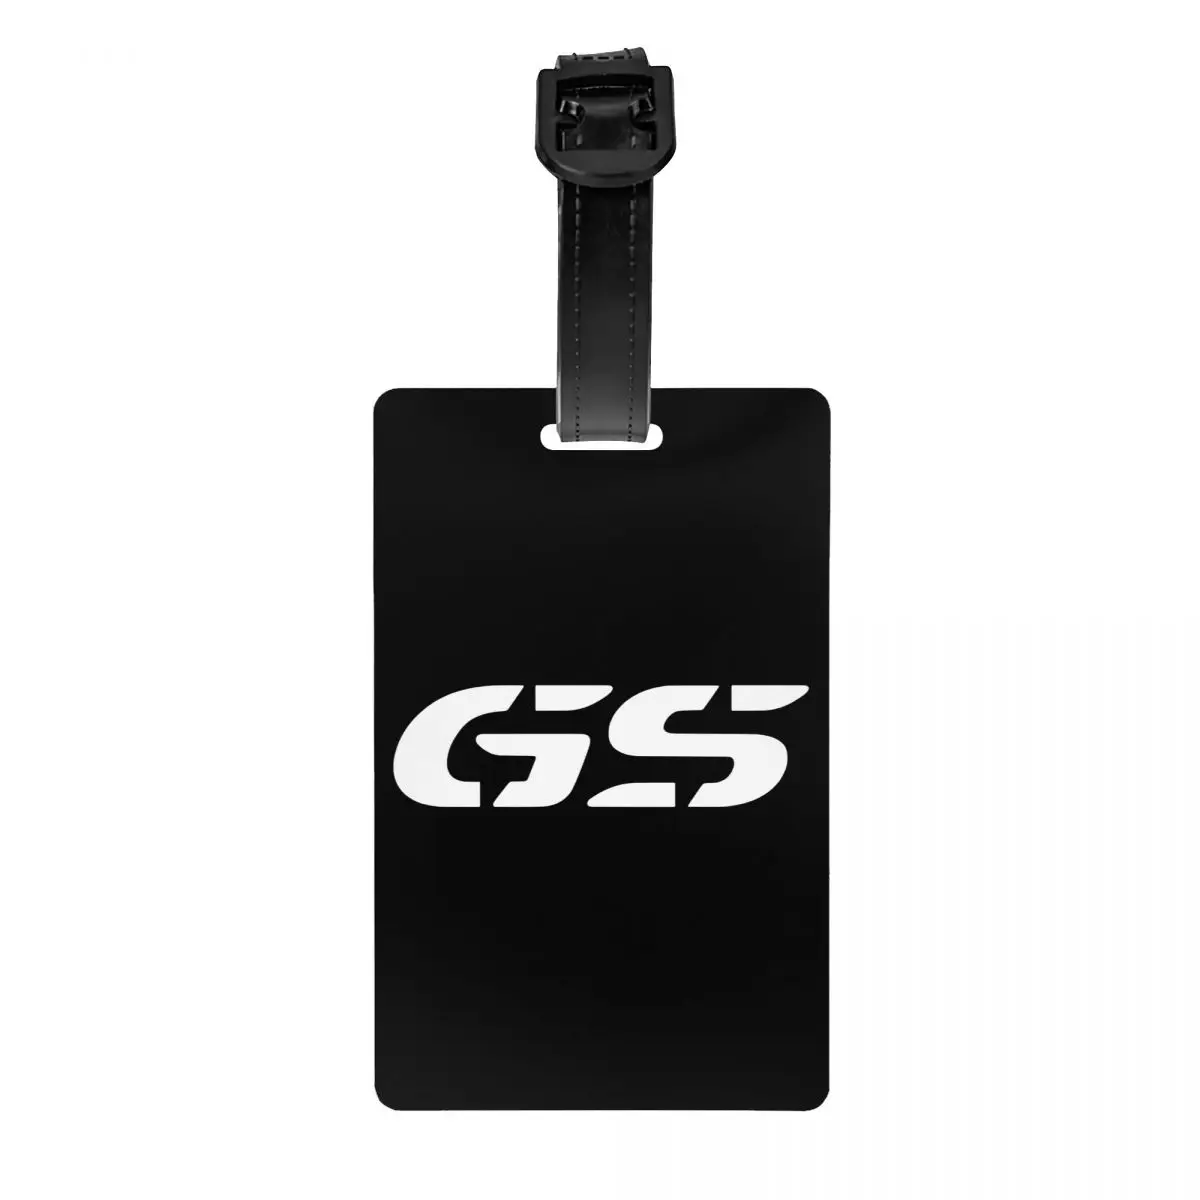 

Custom R1200 GS Motorcycle Adventure Luggage Tag Privacy Protection Motorrad Biker Baggage Tags Travel Bag Labels Suitcase